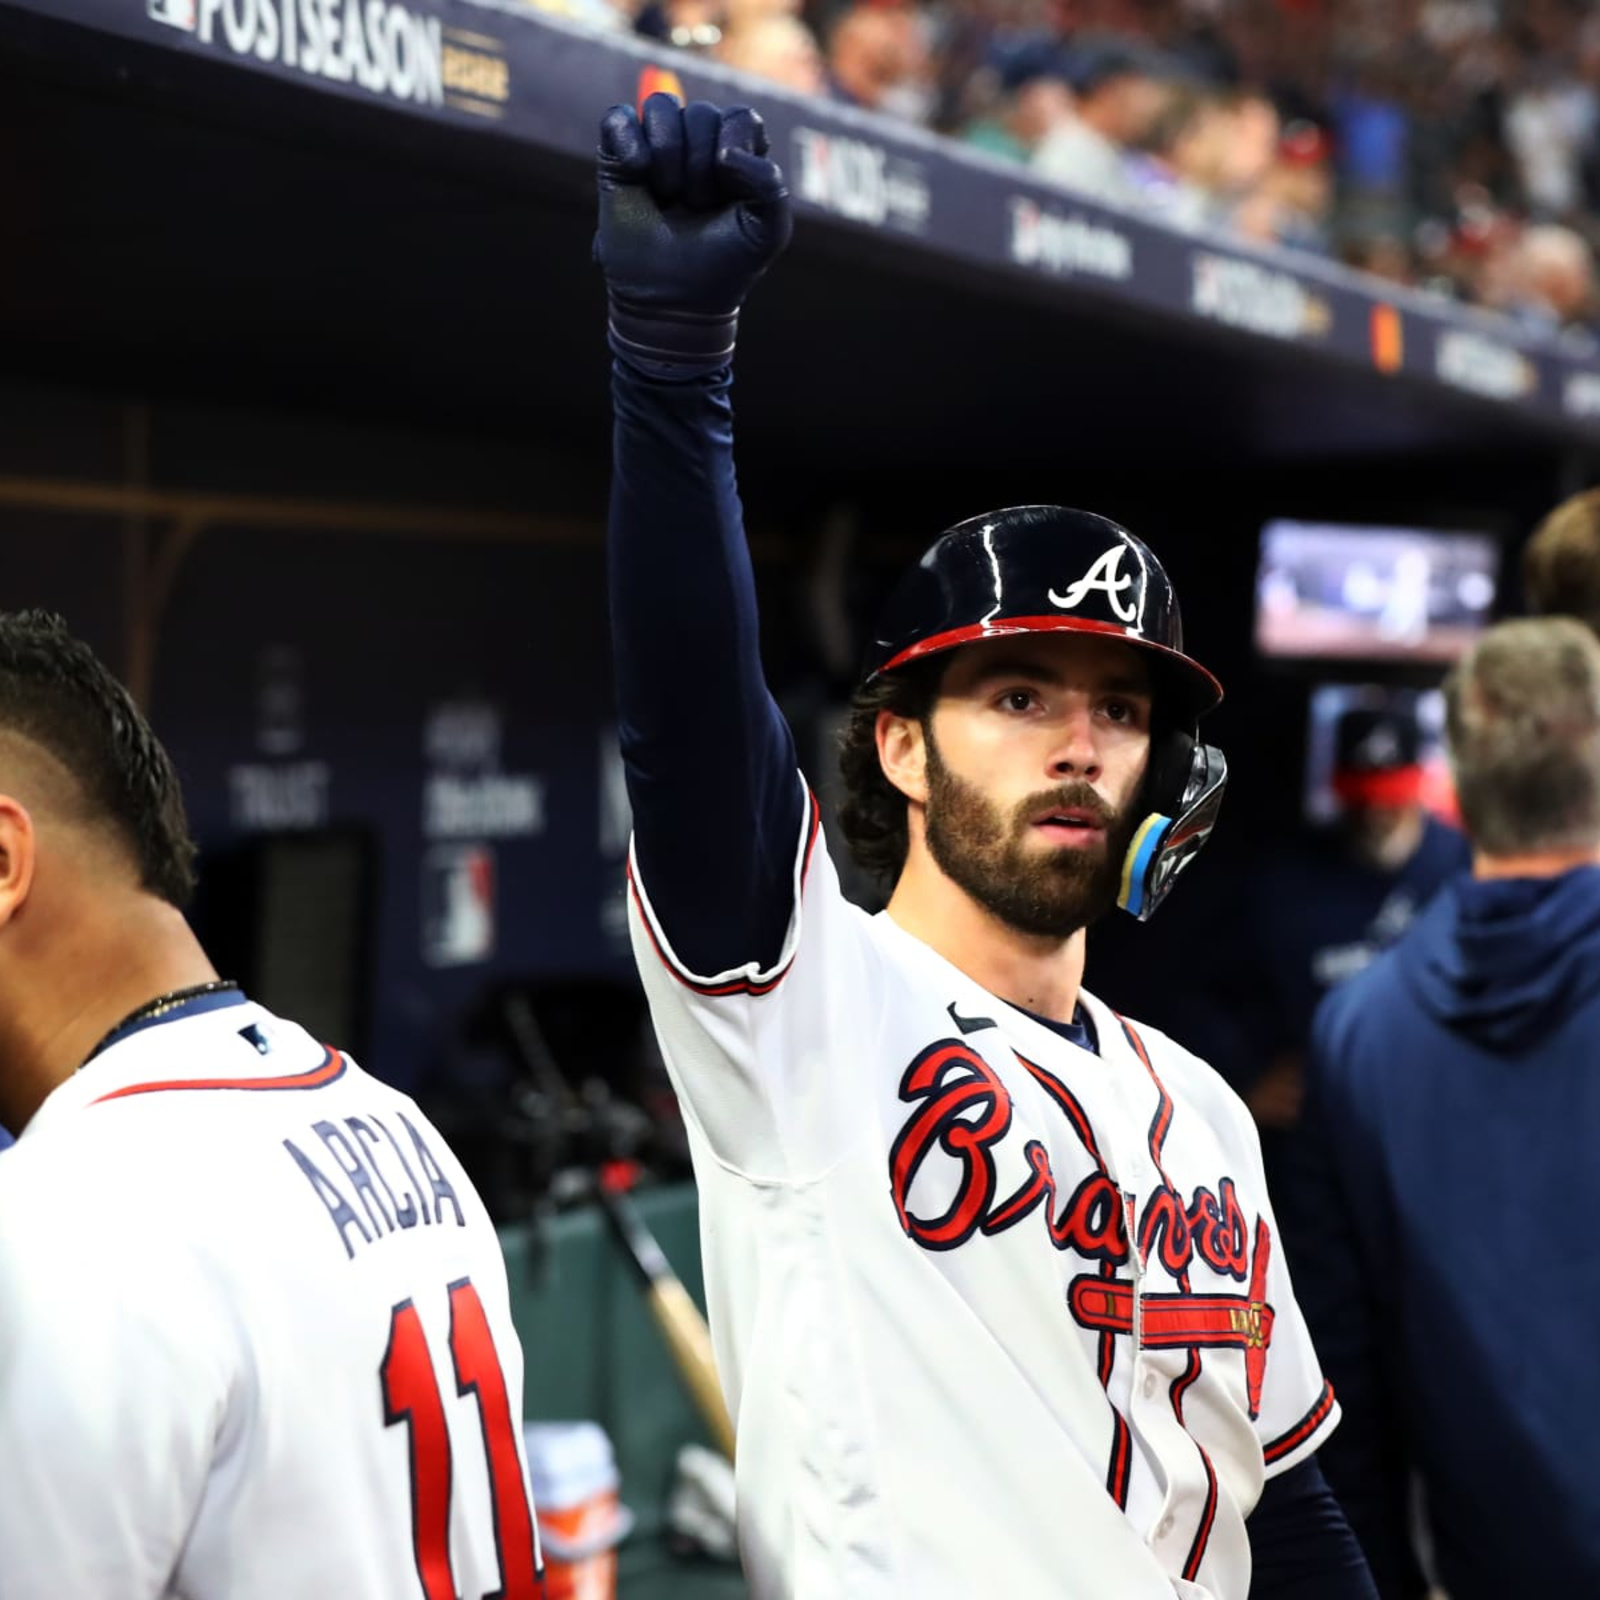 Freddie Freeman on Dansby Swanson's transition, impact on Cubs